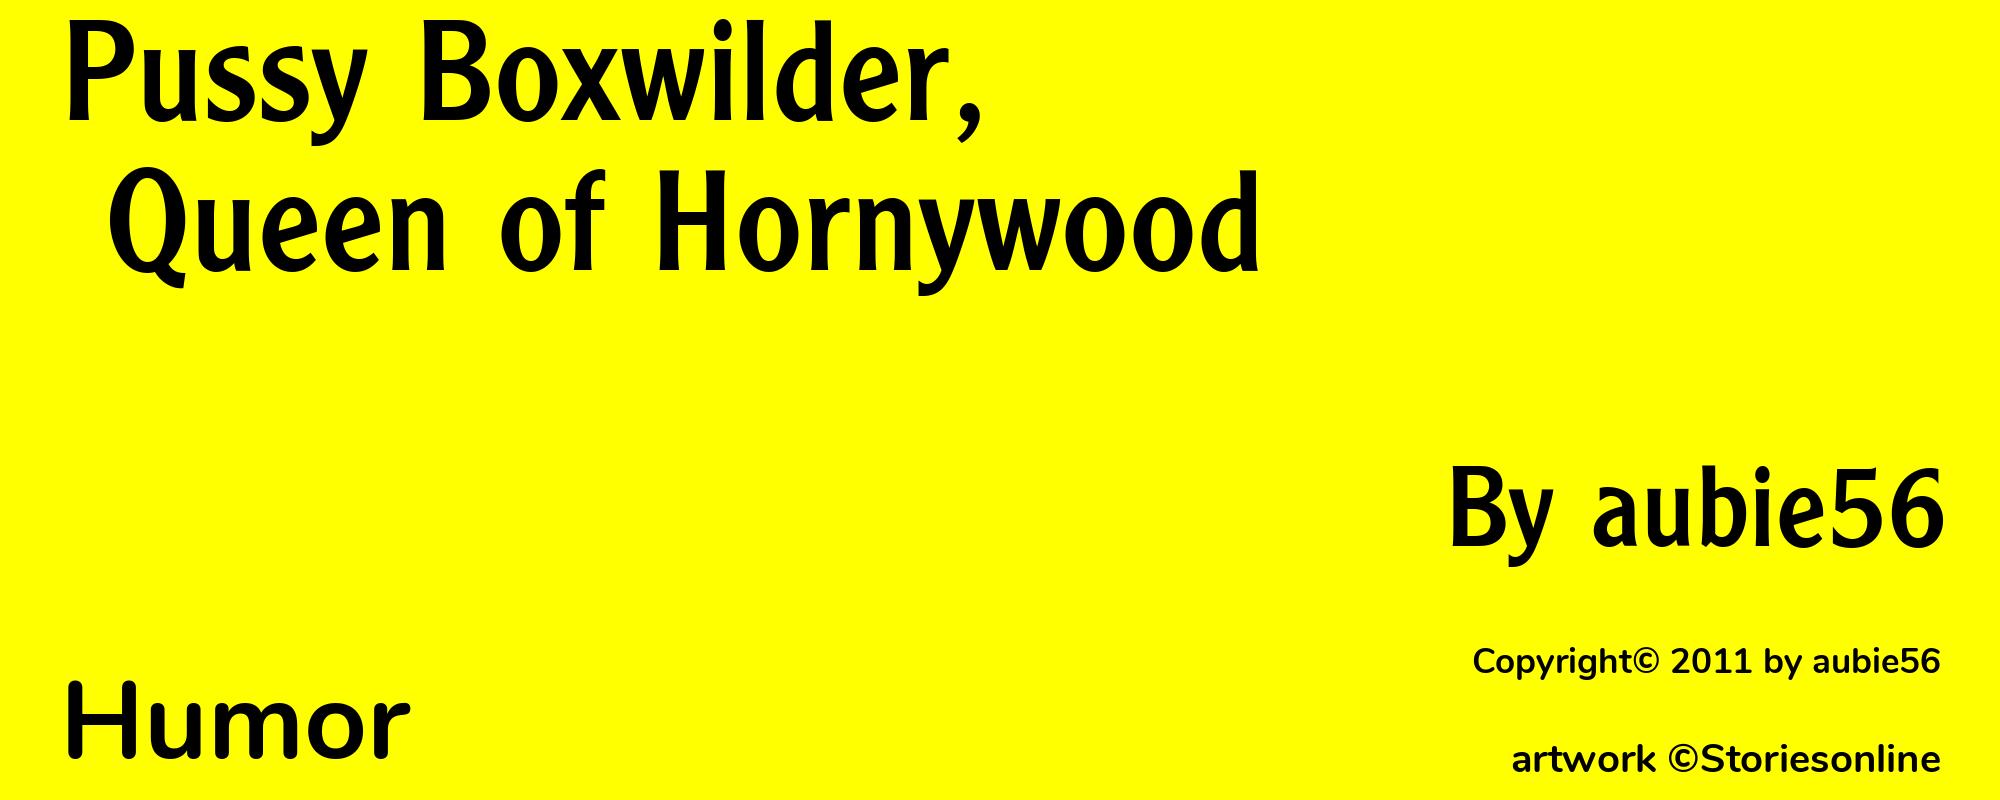 Pussy Boxwilder, Queen of Hornywood - Cover